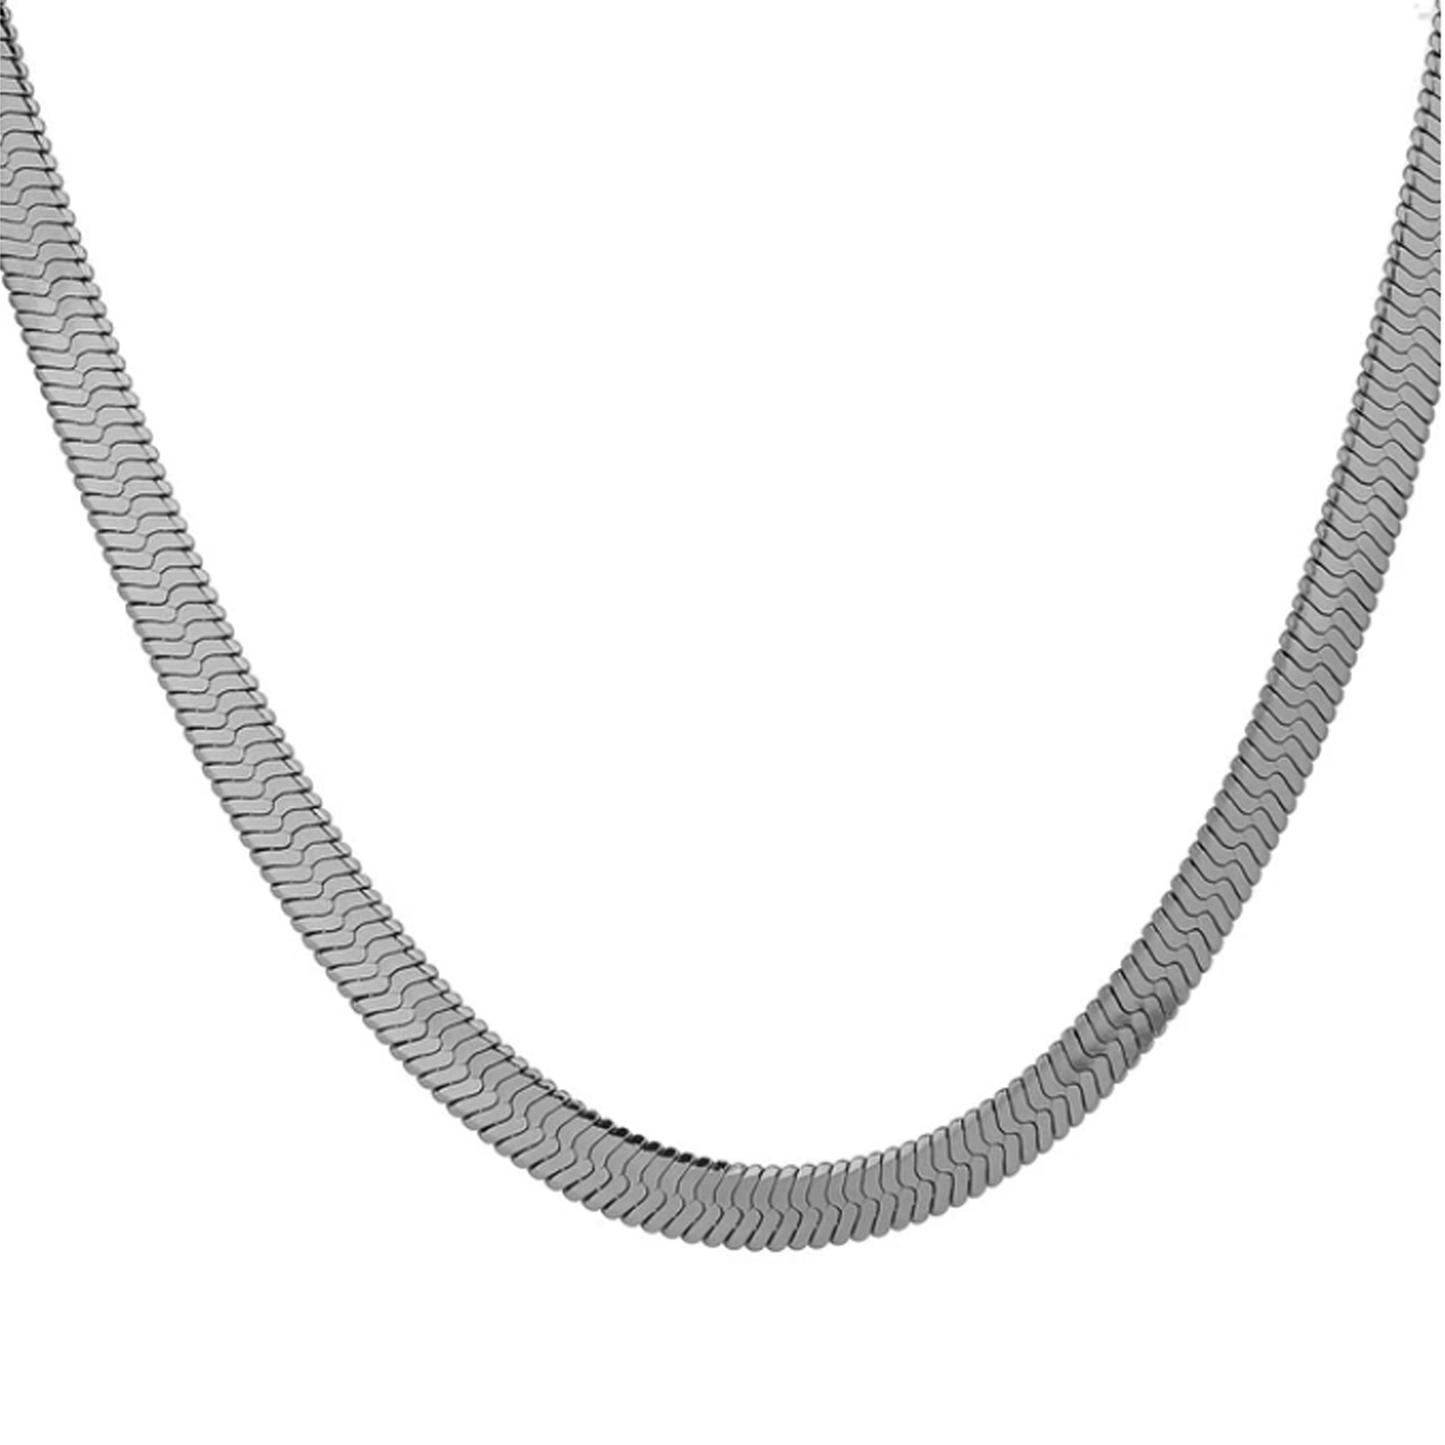 Opes Robur SILVER SNAKE CHAIN